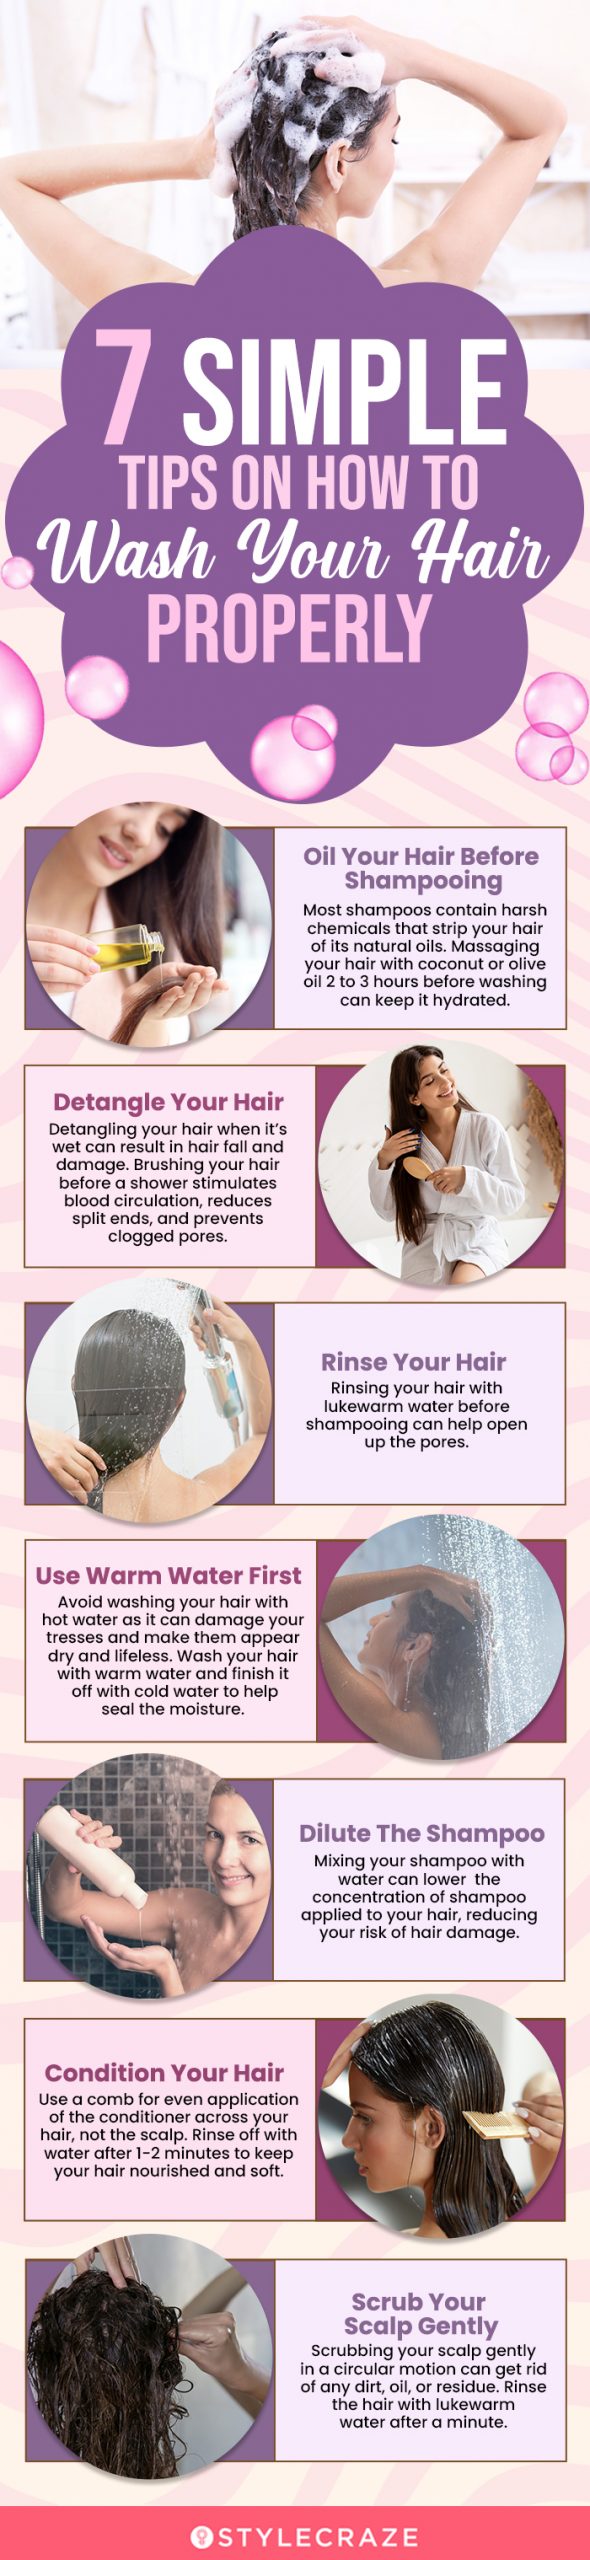 7 simple tips on how to wash your hair properly [infographic]